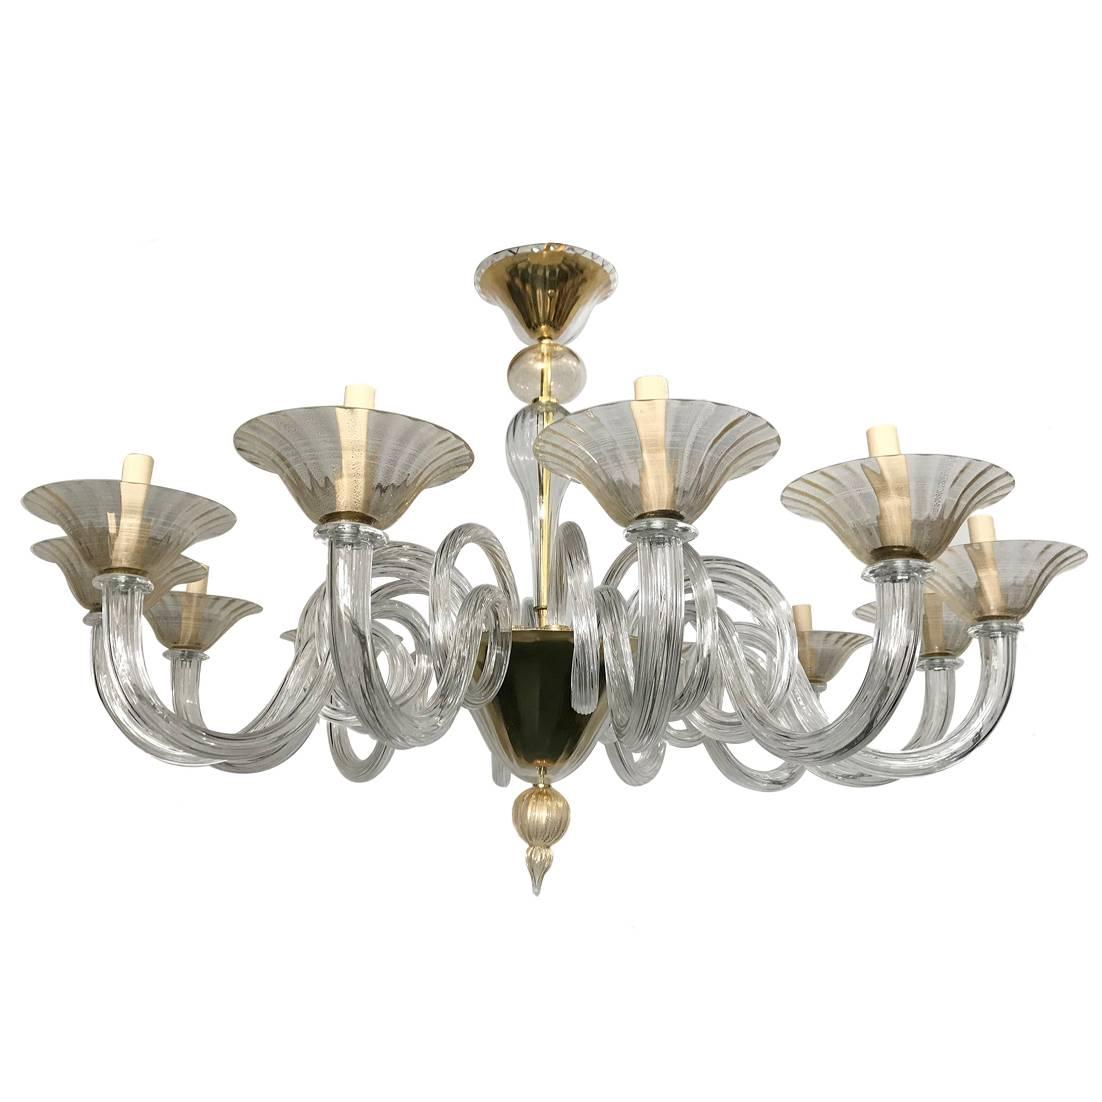 A circa 1960s Murano glass chandelier with clear and gold dust insets, 12 lights.

Measurements:
Diameter: 41.75
Minimum drop: 30